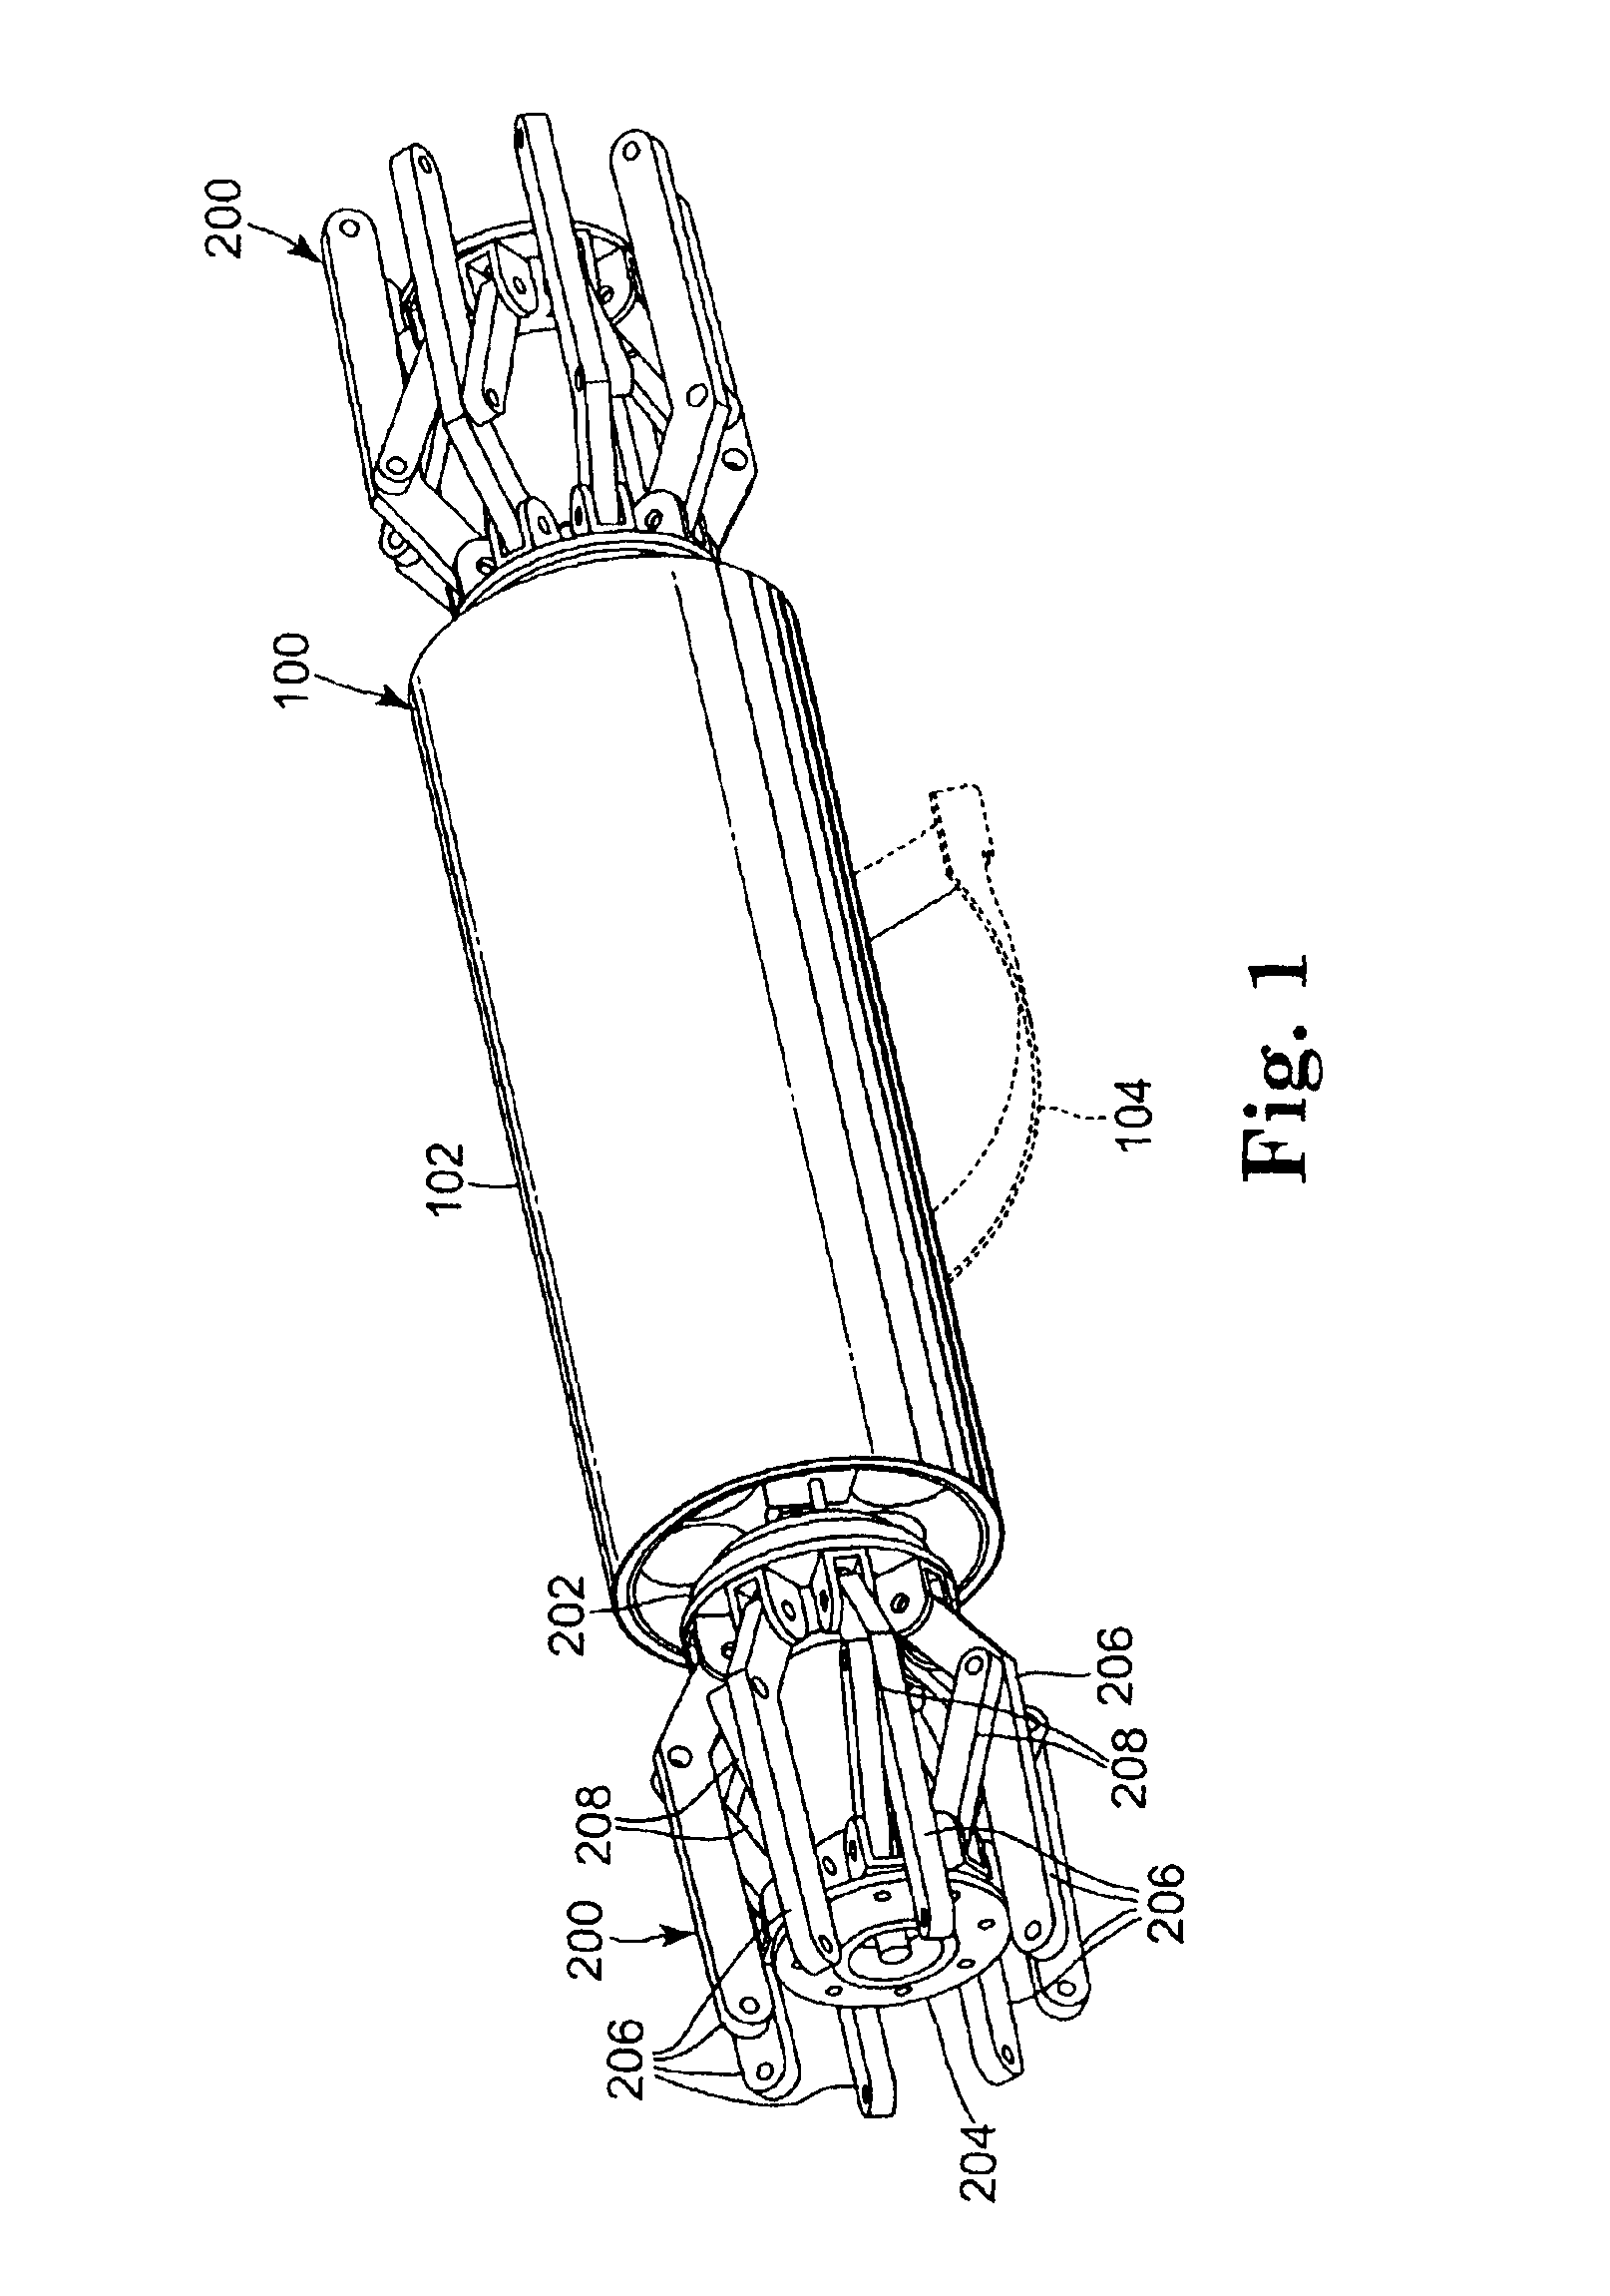 Adjustable diameter wheel assembly, and methods and vehicles using same